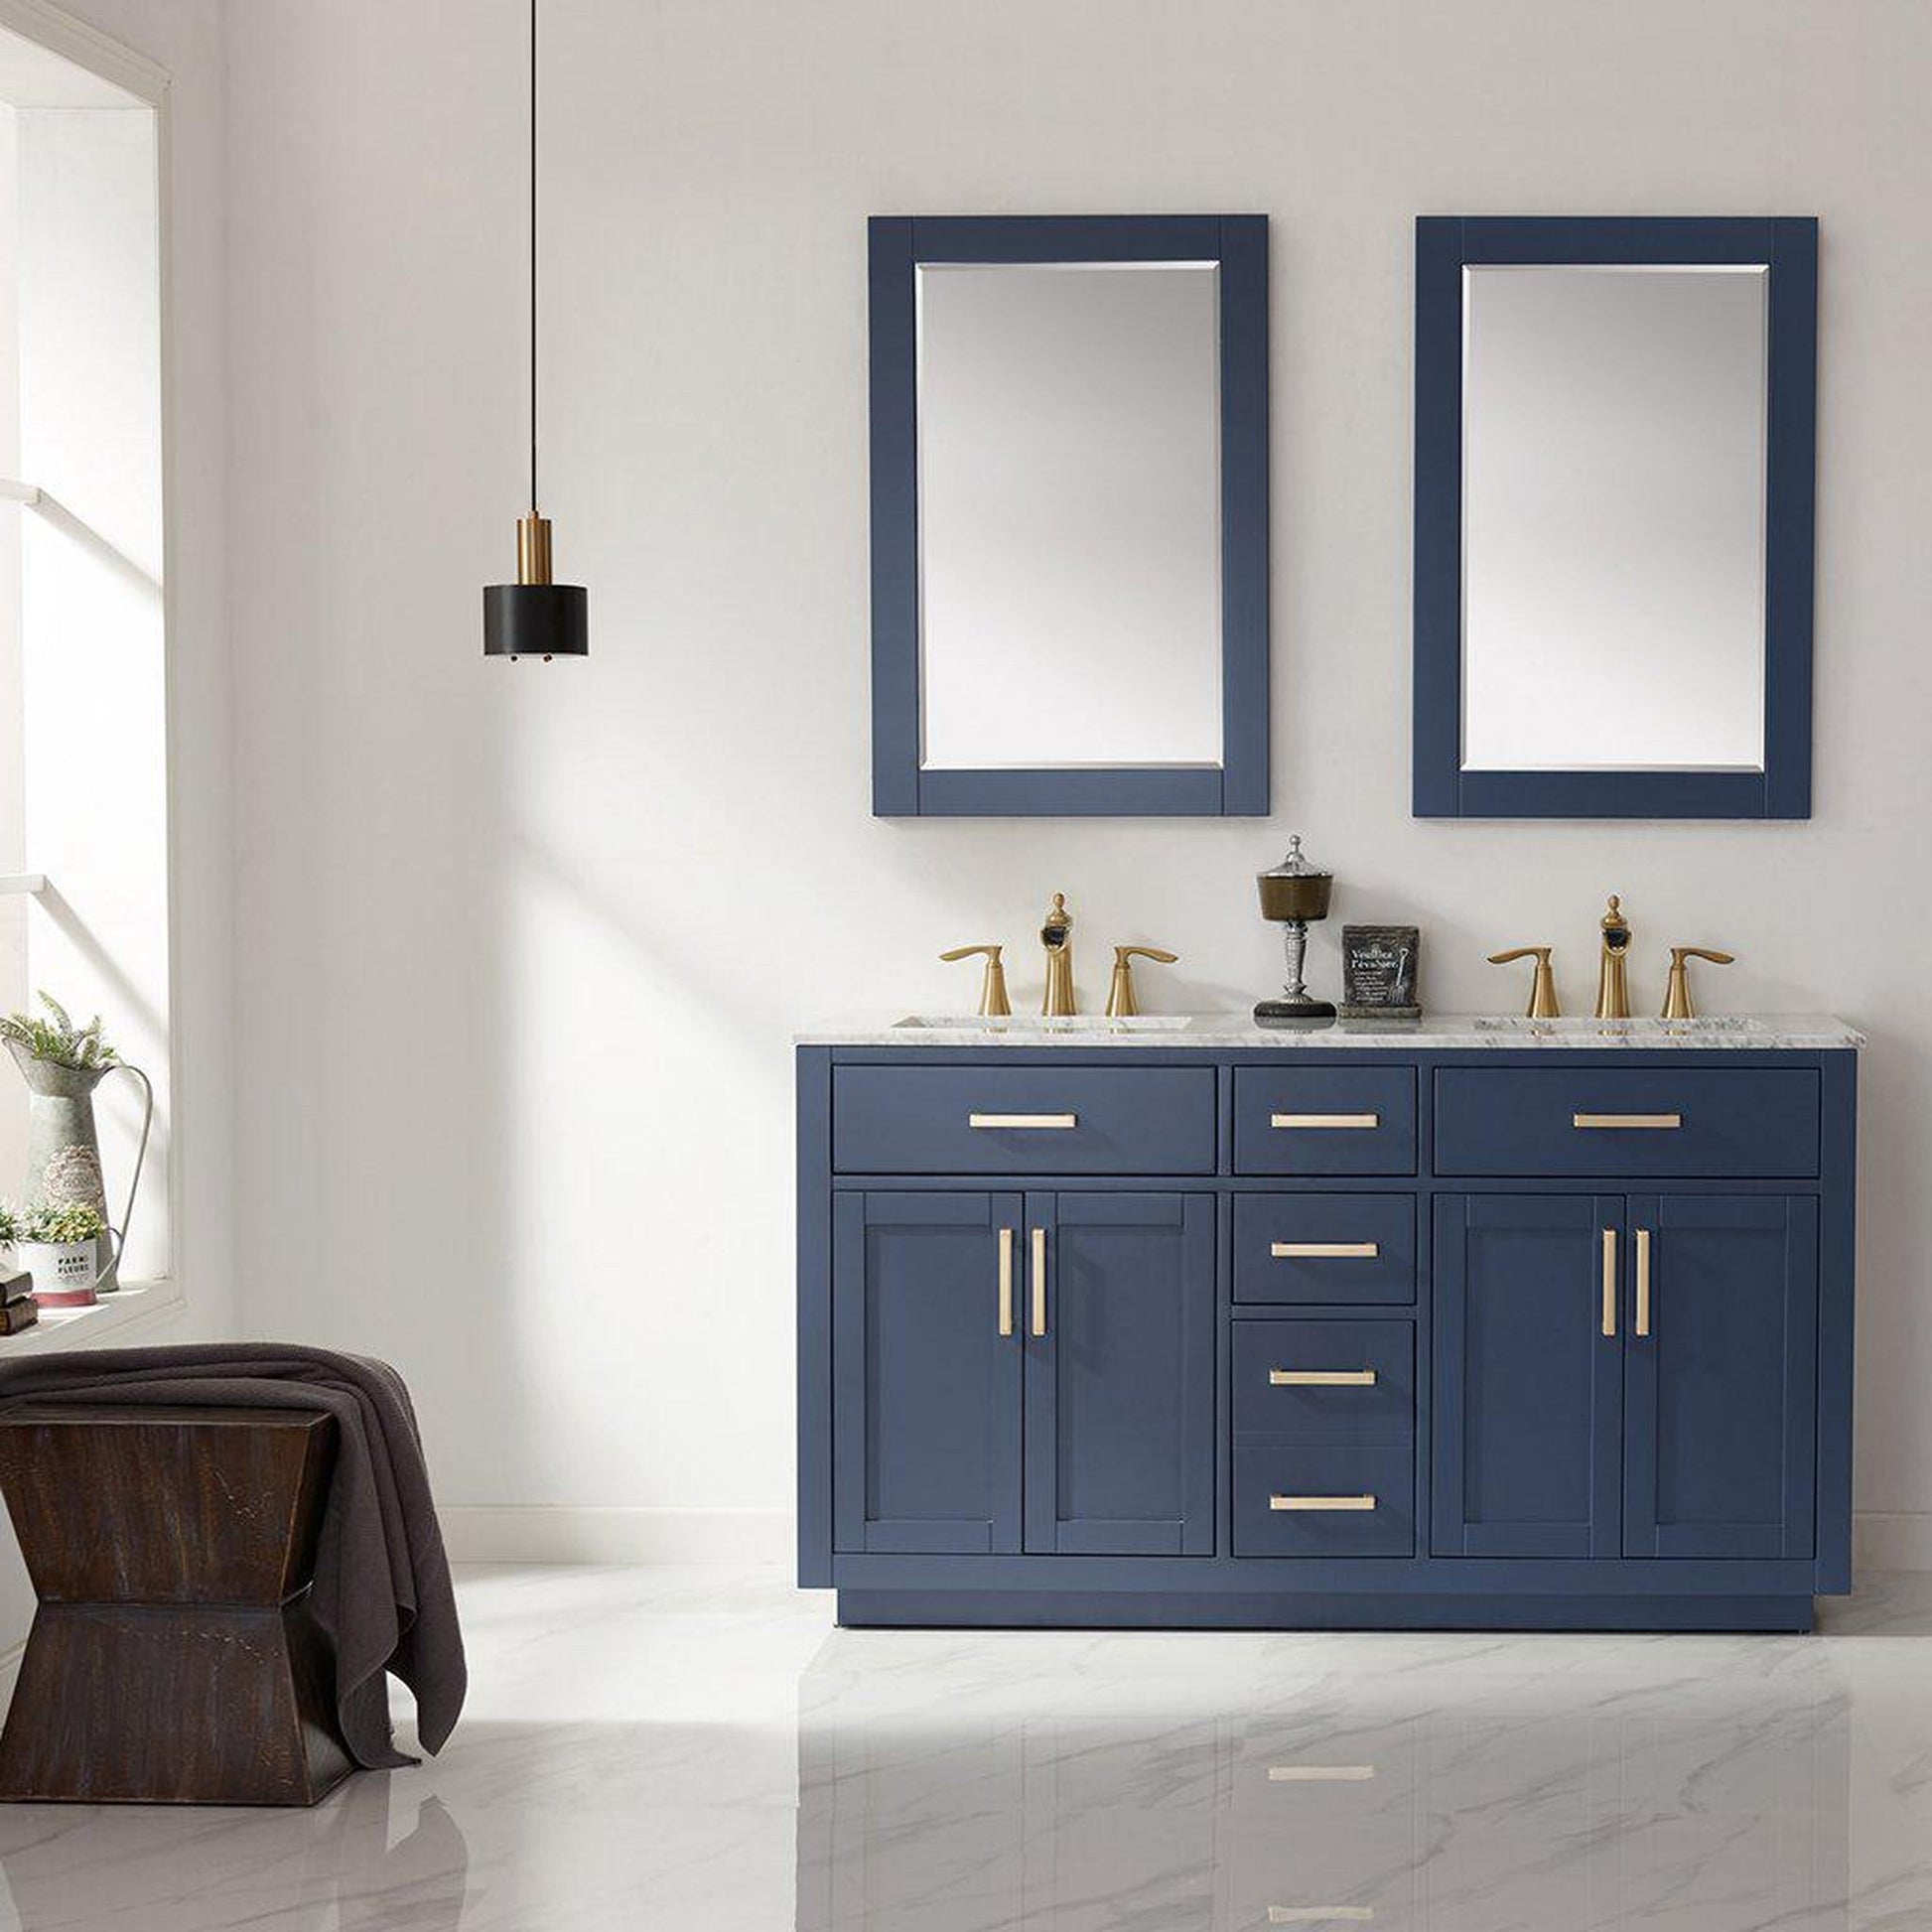 Altair Ivy 60" Double Royal Blue Freestanding Bathroom Vanity Set With Mirror, Natural Carrara White Marble Top, Two Rectangular Undermount Ceramic Sinks, and Overflow